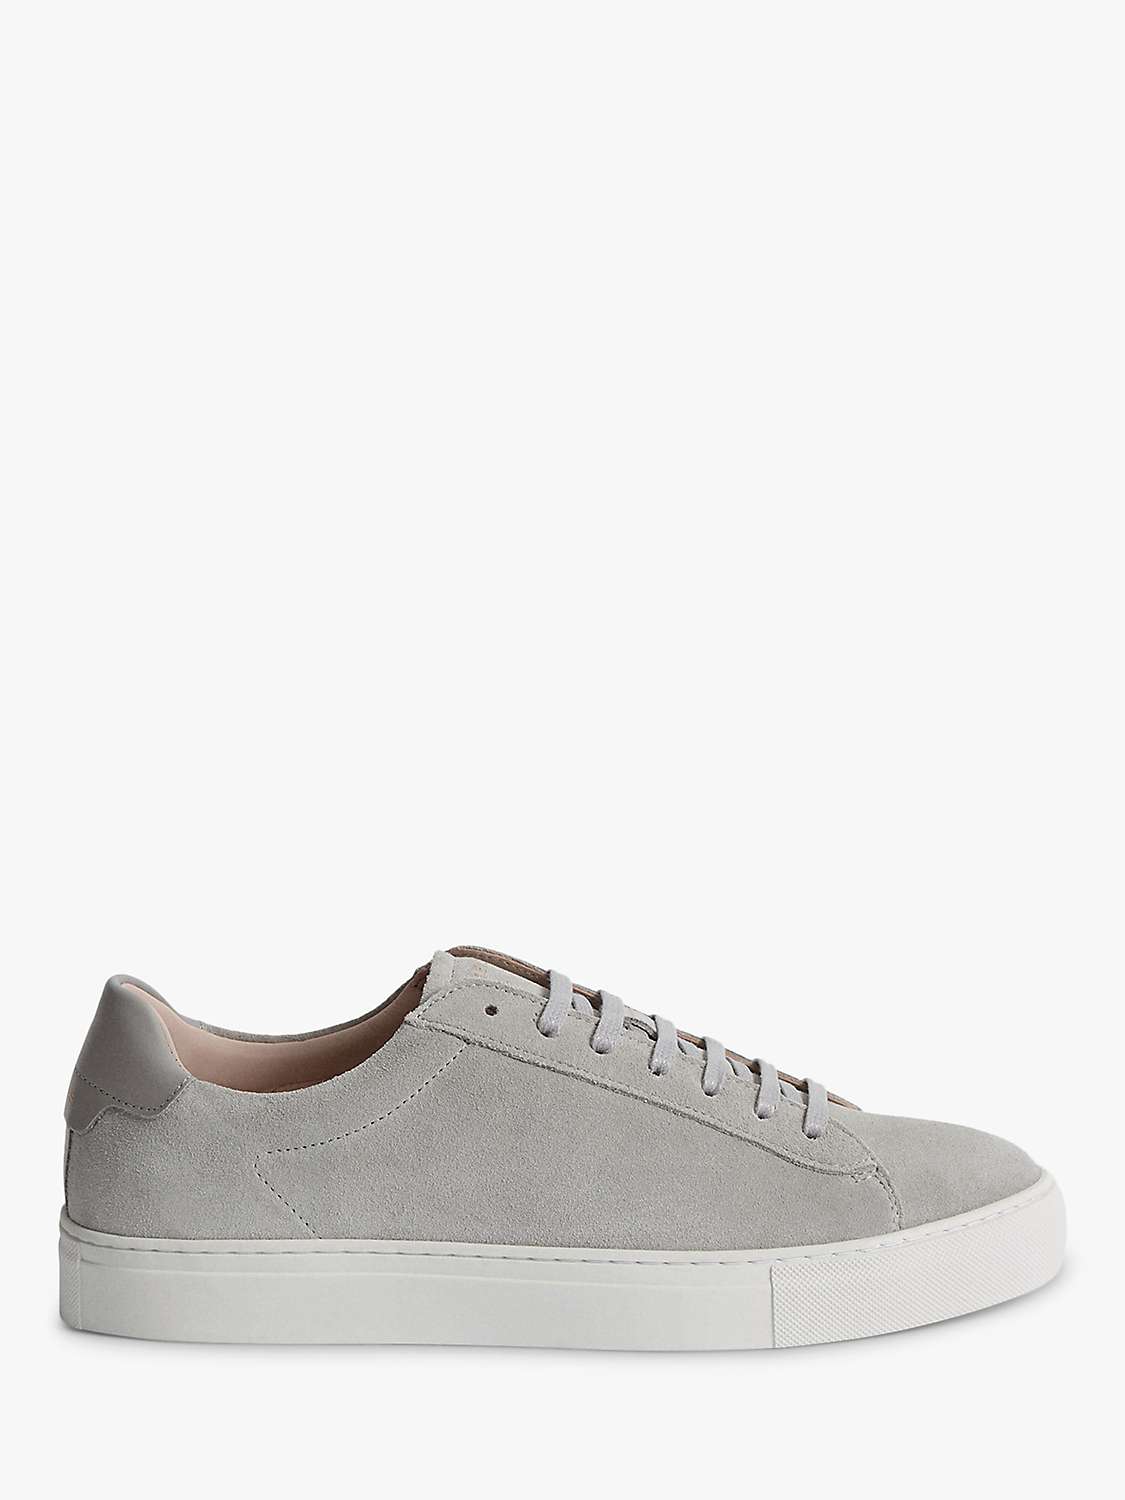 Reiss Finley Suede Leather Trainers, Light Grey at John Lewis & Partners